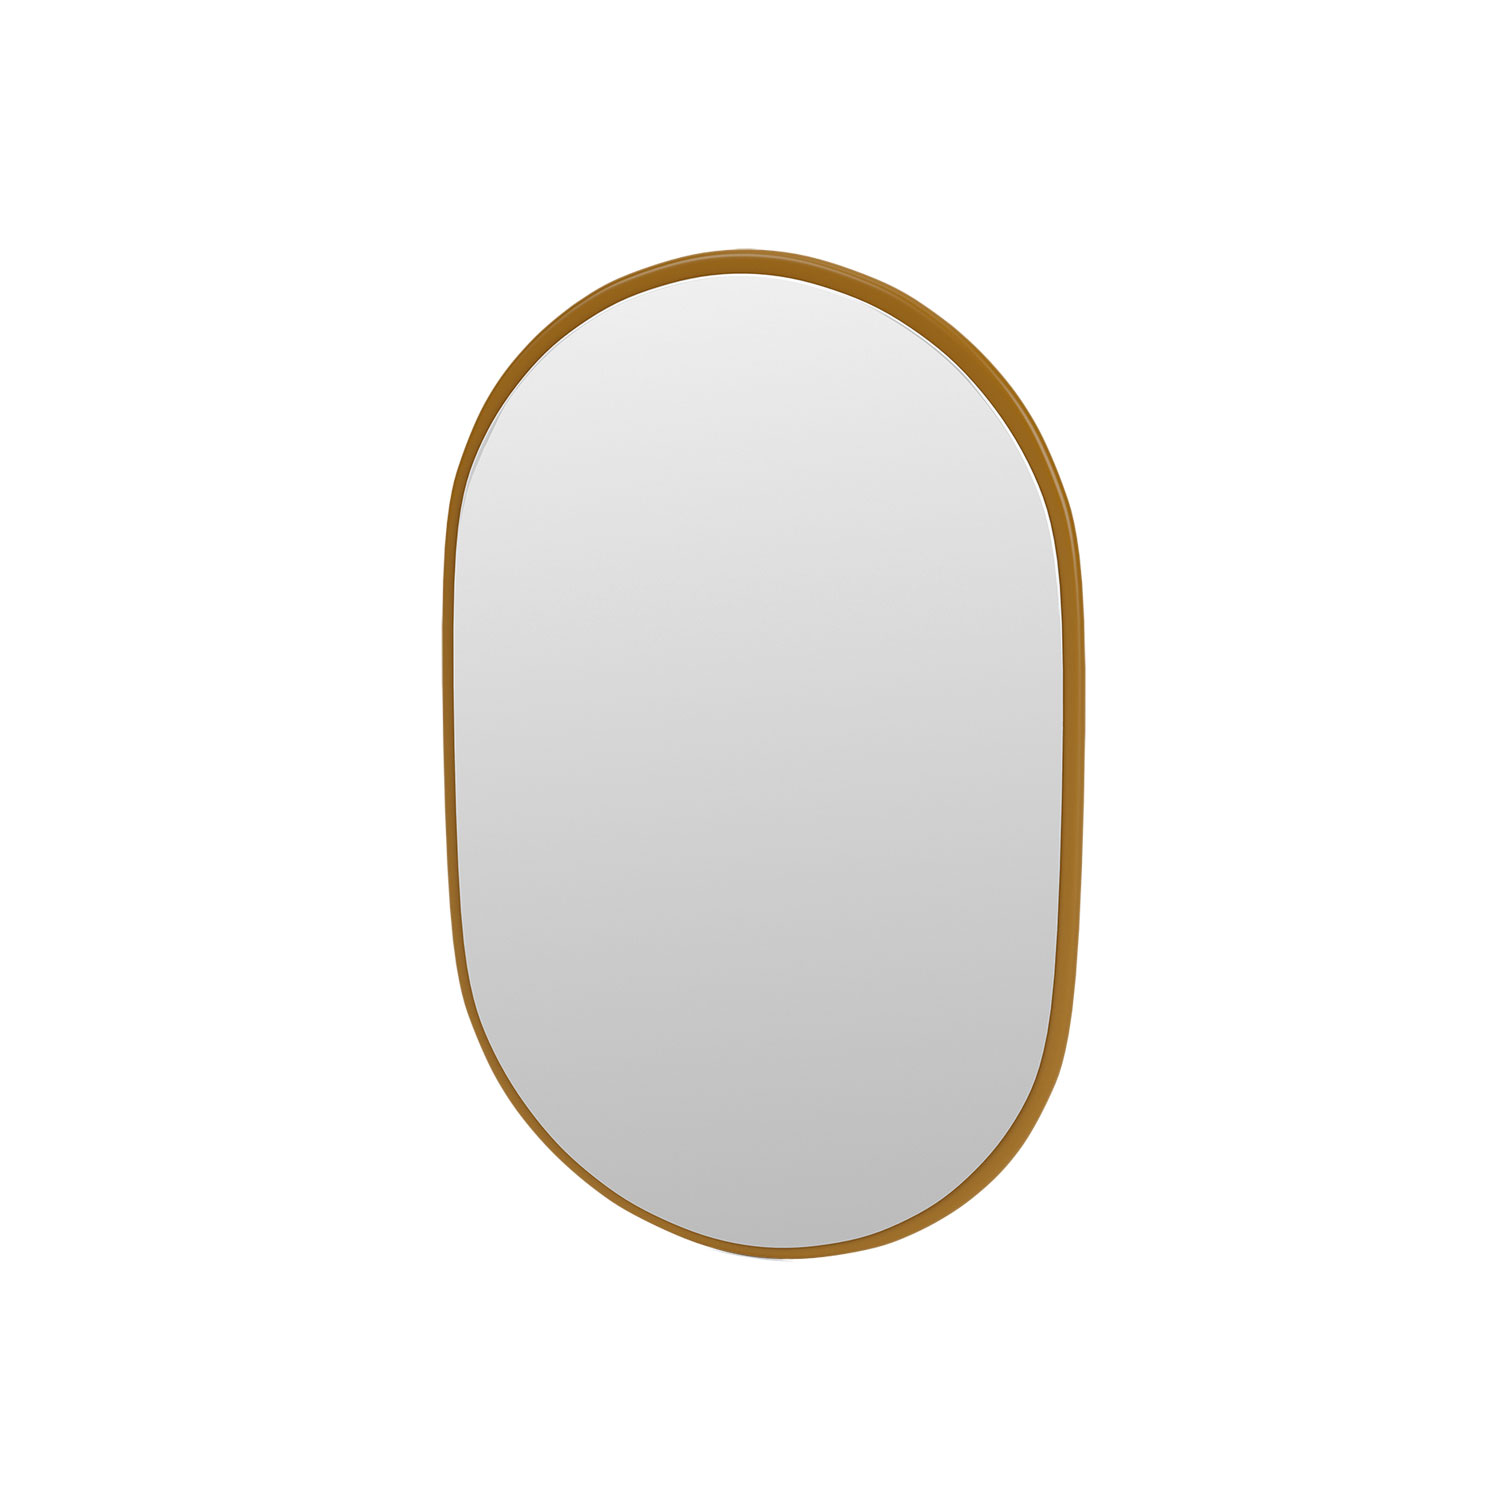 LOOK oval mirror, Amber